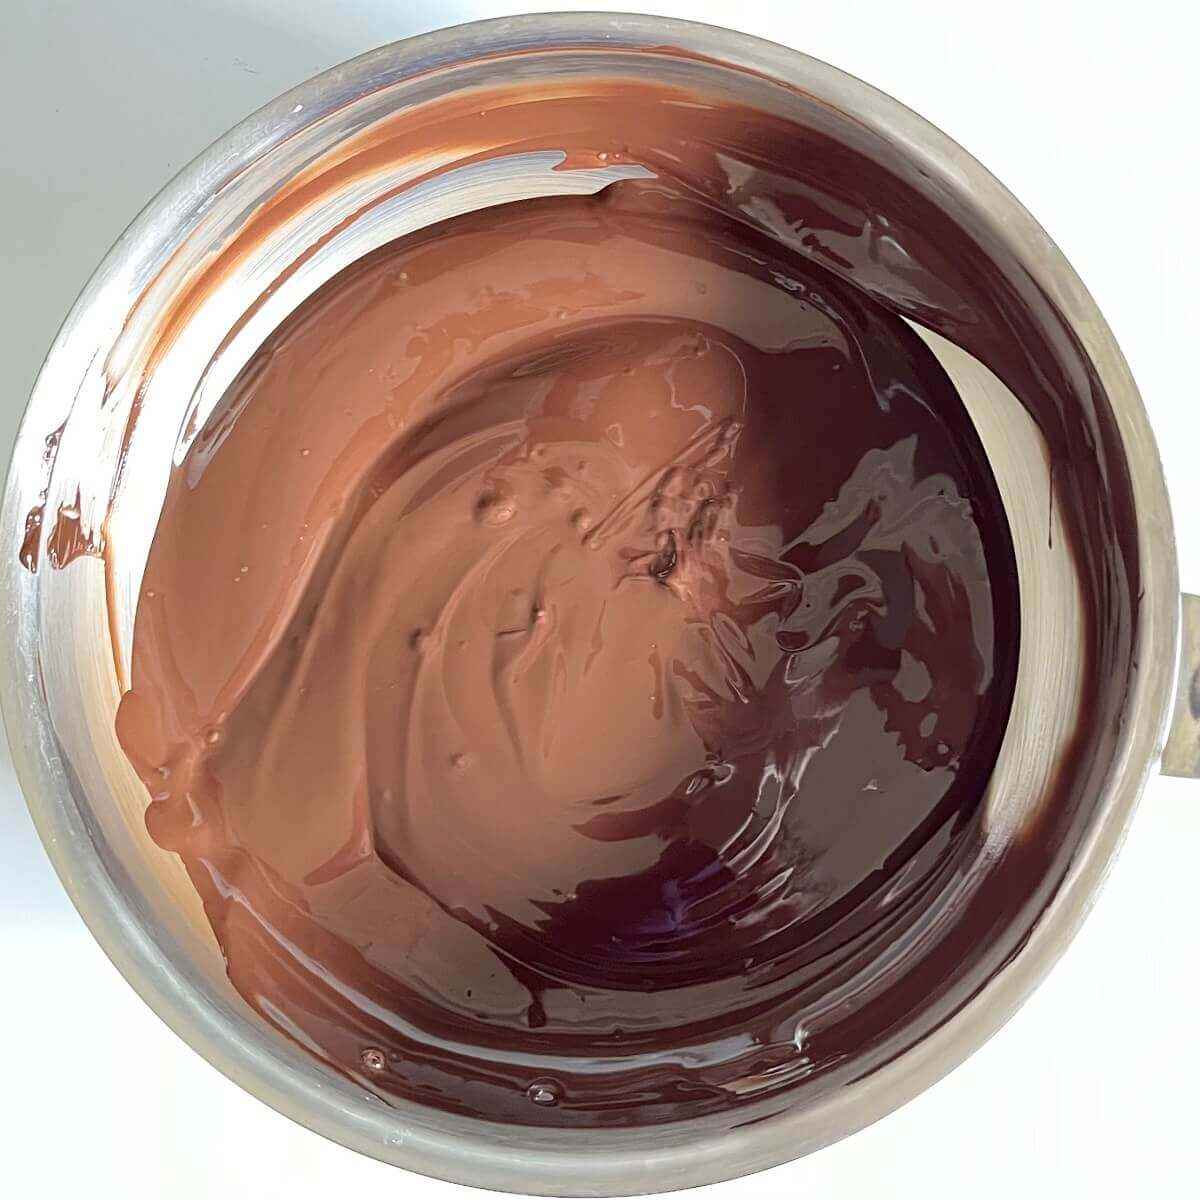 Melted dark chocolate in a stainless steel pan.